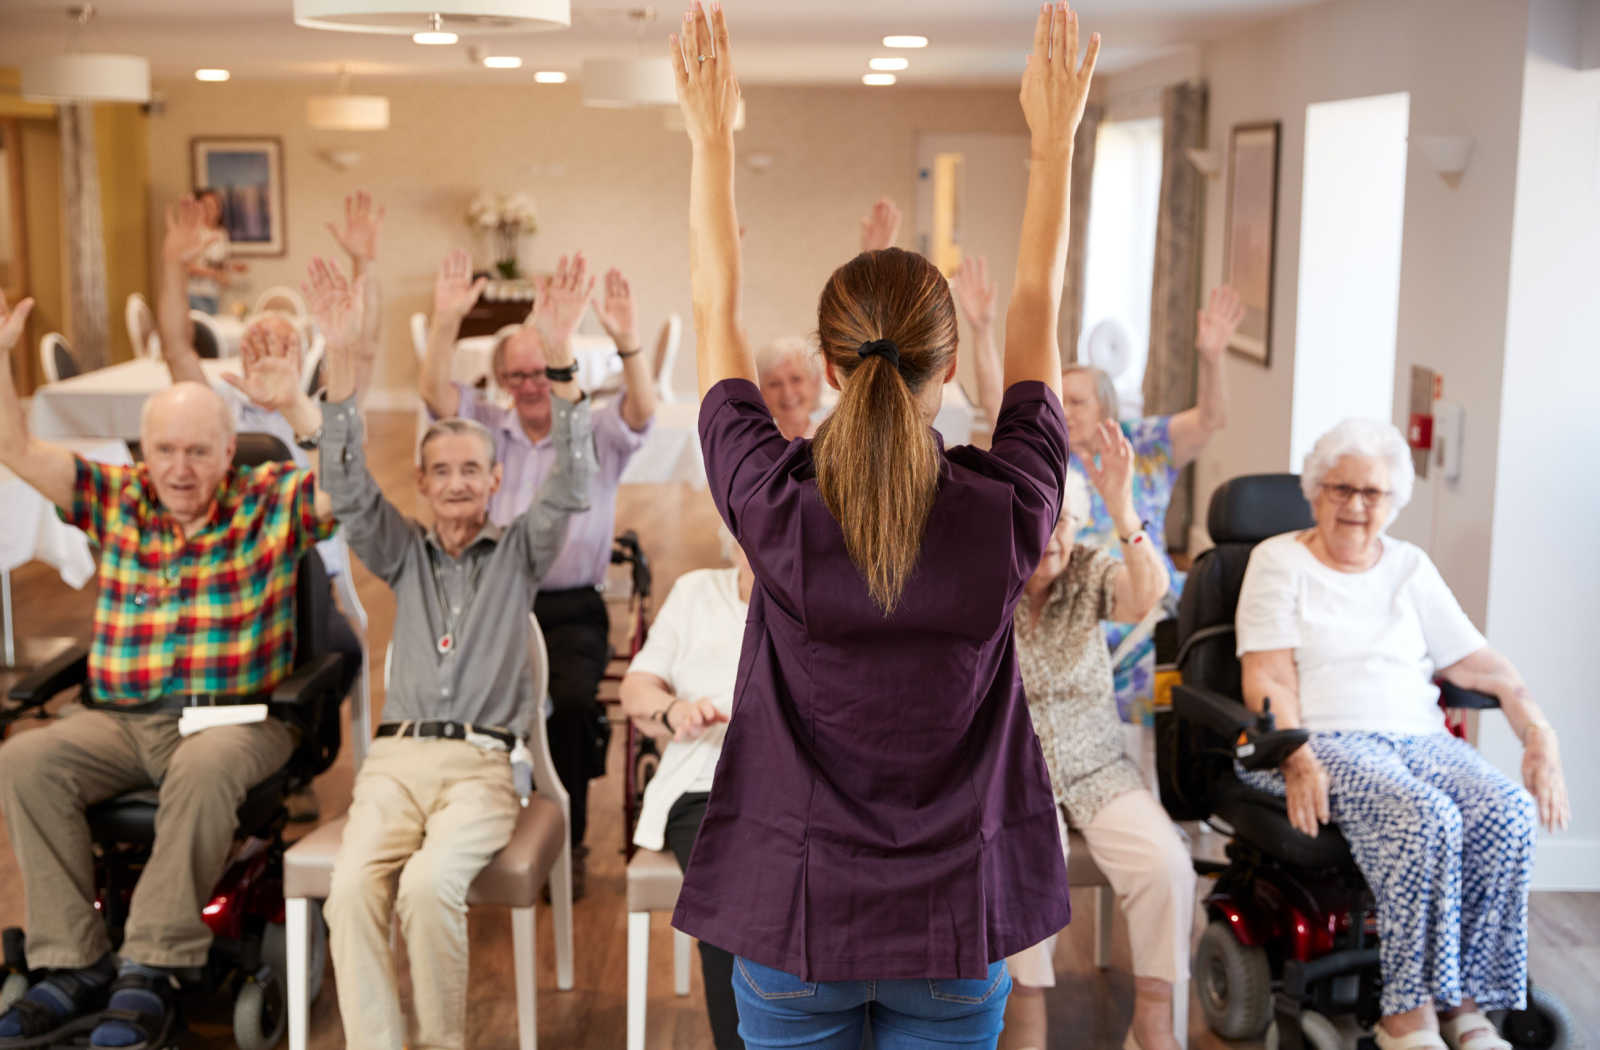 A group of seniors in a senior living community sitting and exercising together, guided by a trained staff member.